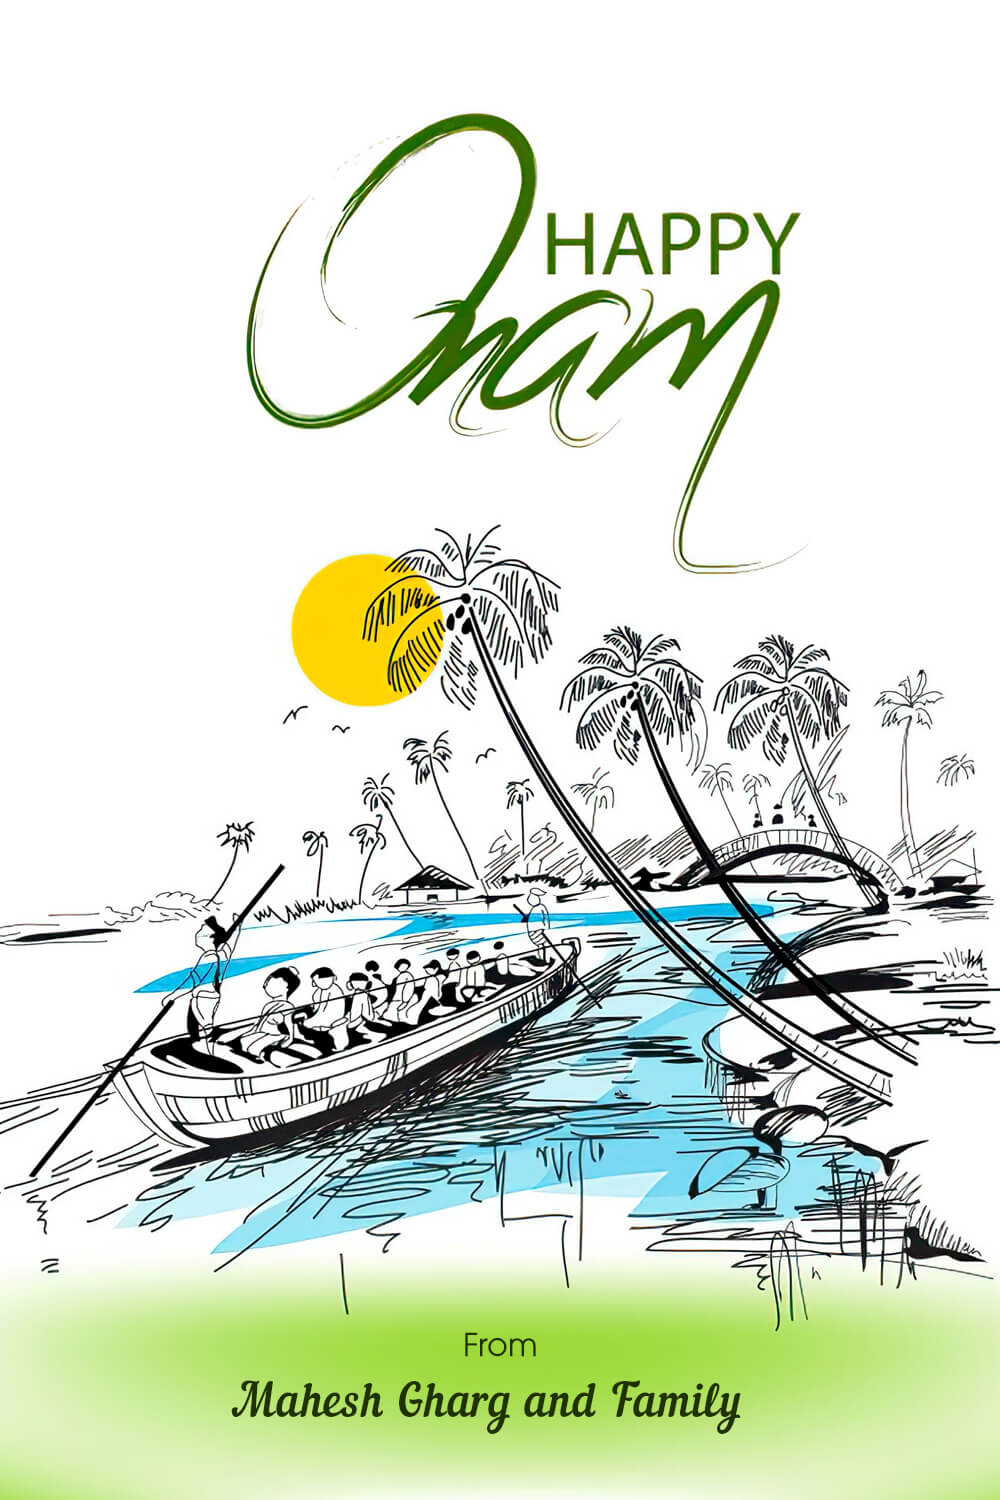 Traditional Green Theme Onam Greetings with Boat Cartoon – VRiddle